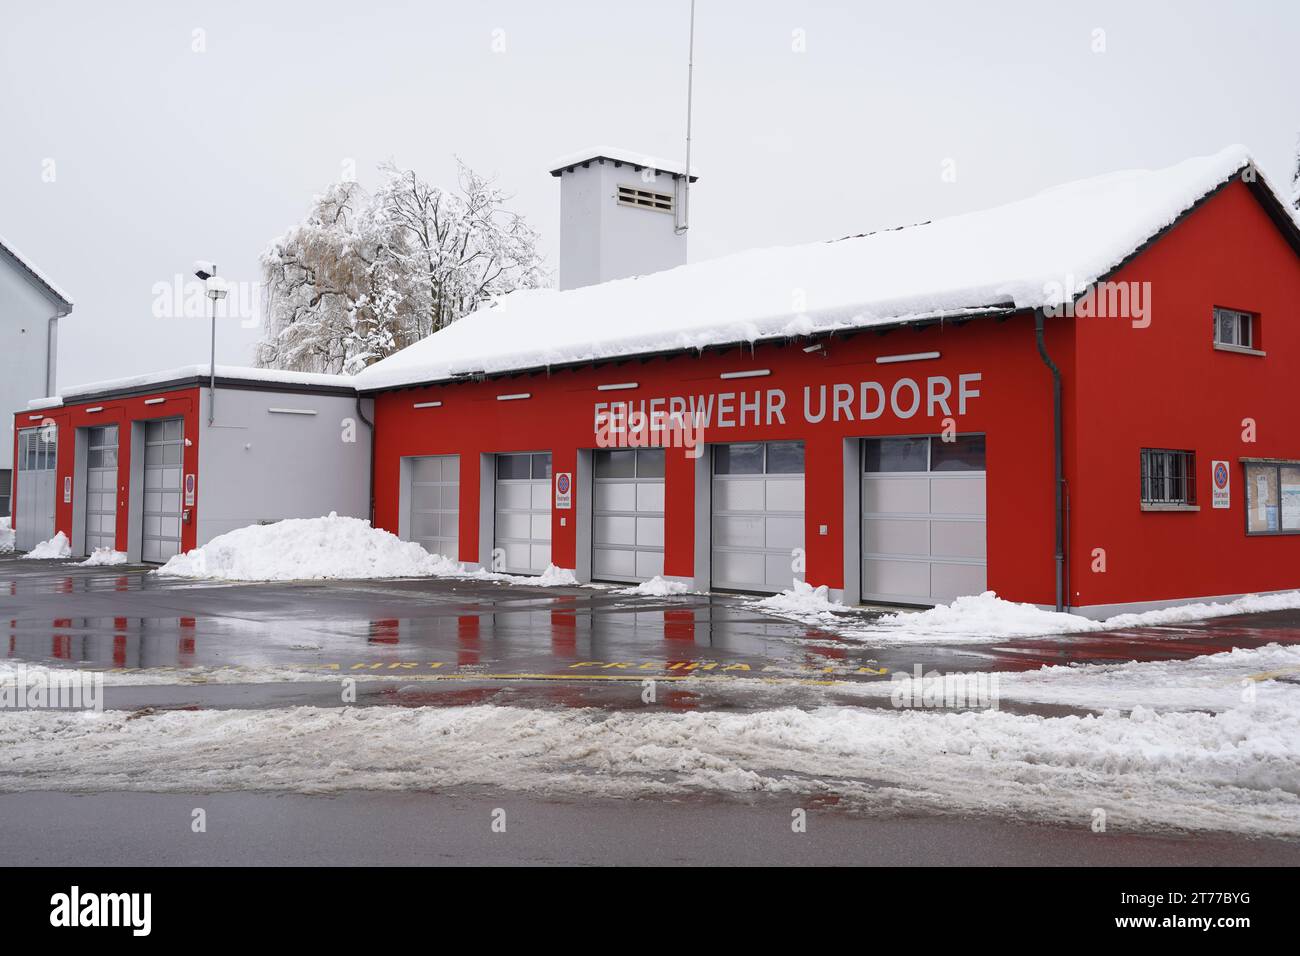 Fire department building Urdorf with an inscription in German language. Stock Photo